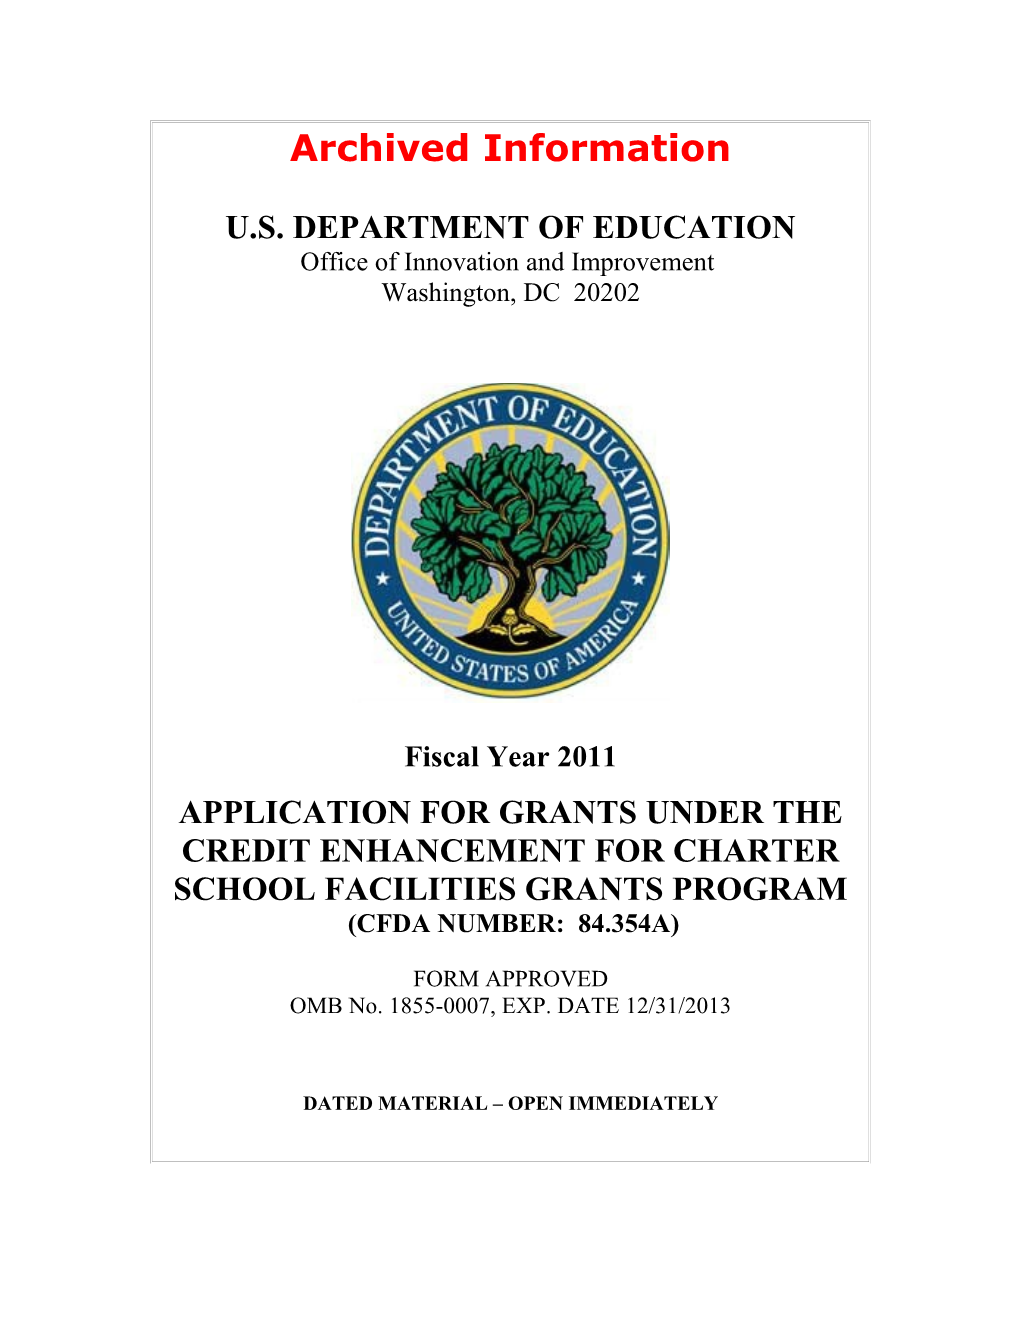 Archived Information: FY 2011 Application for Grants Under the Credit Enhancement for Charter